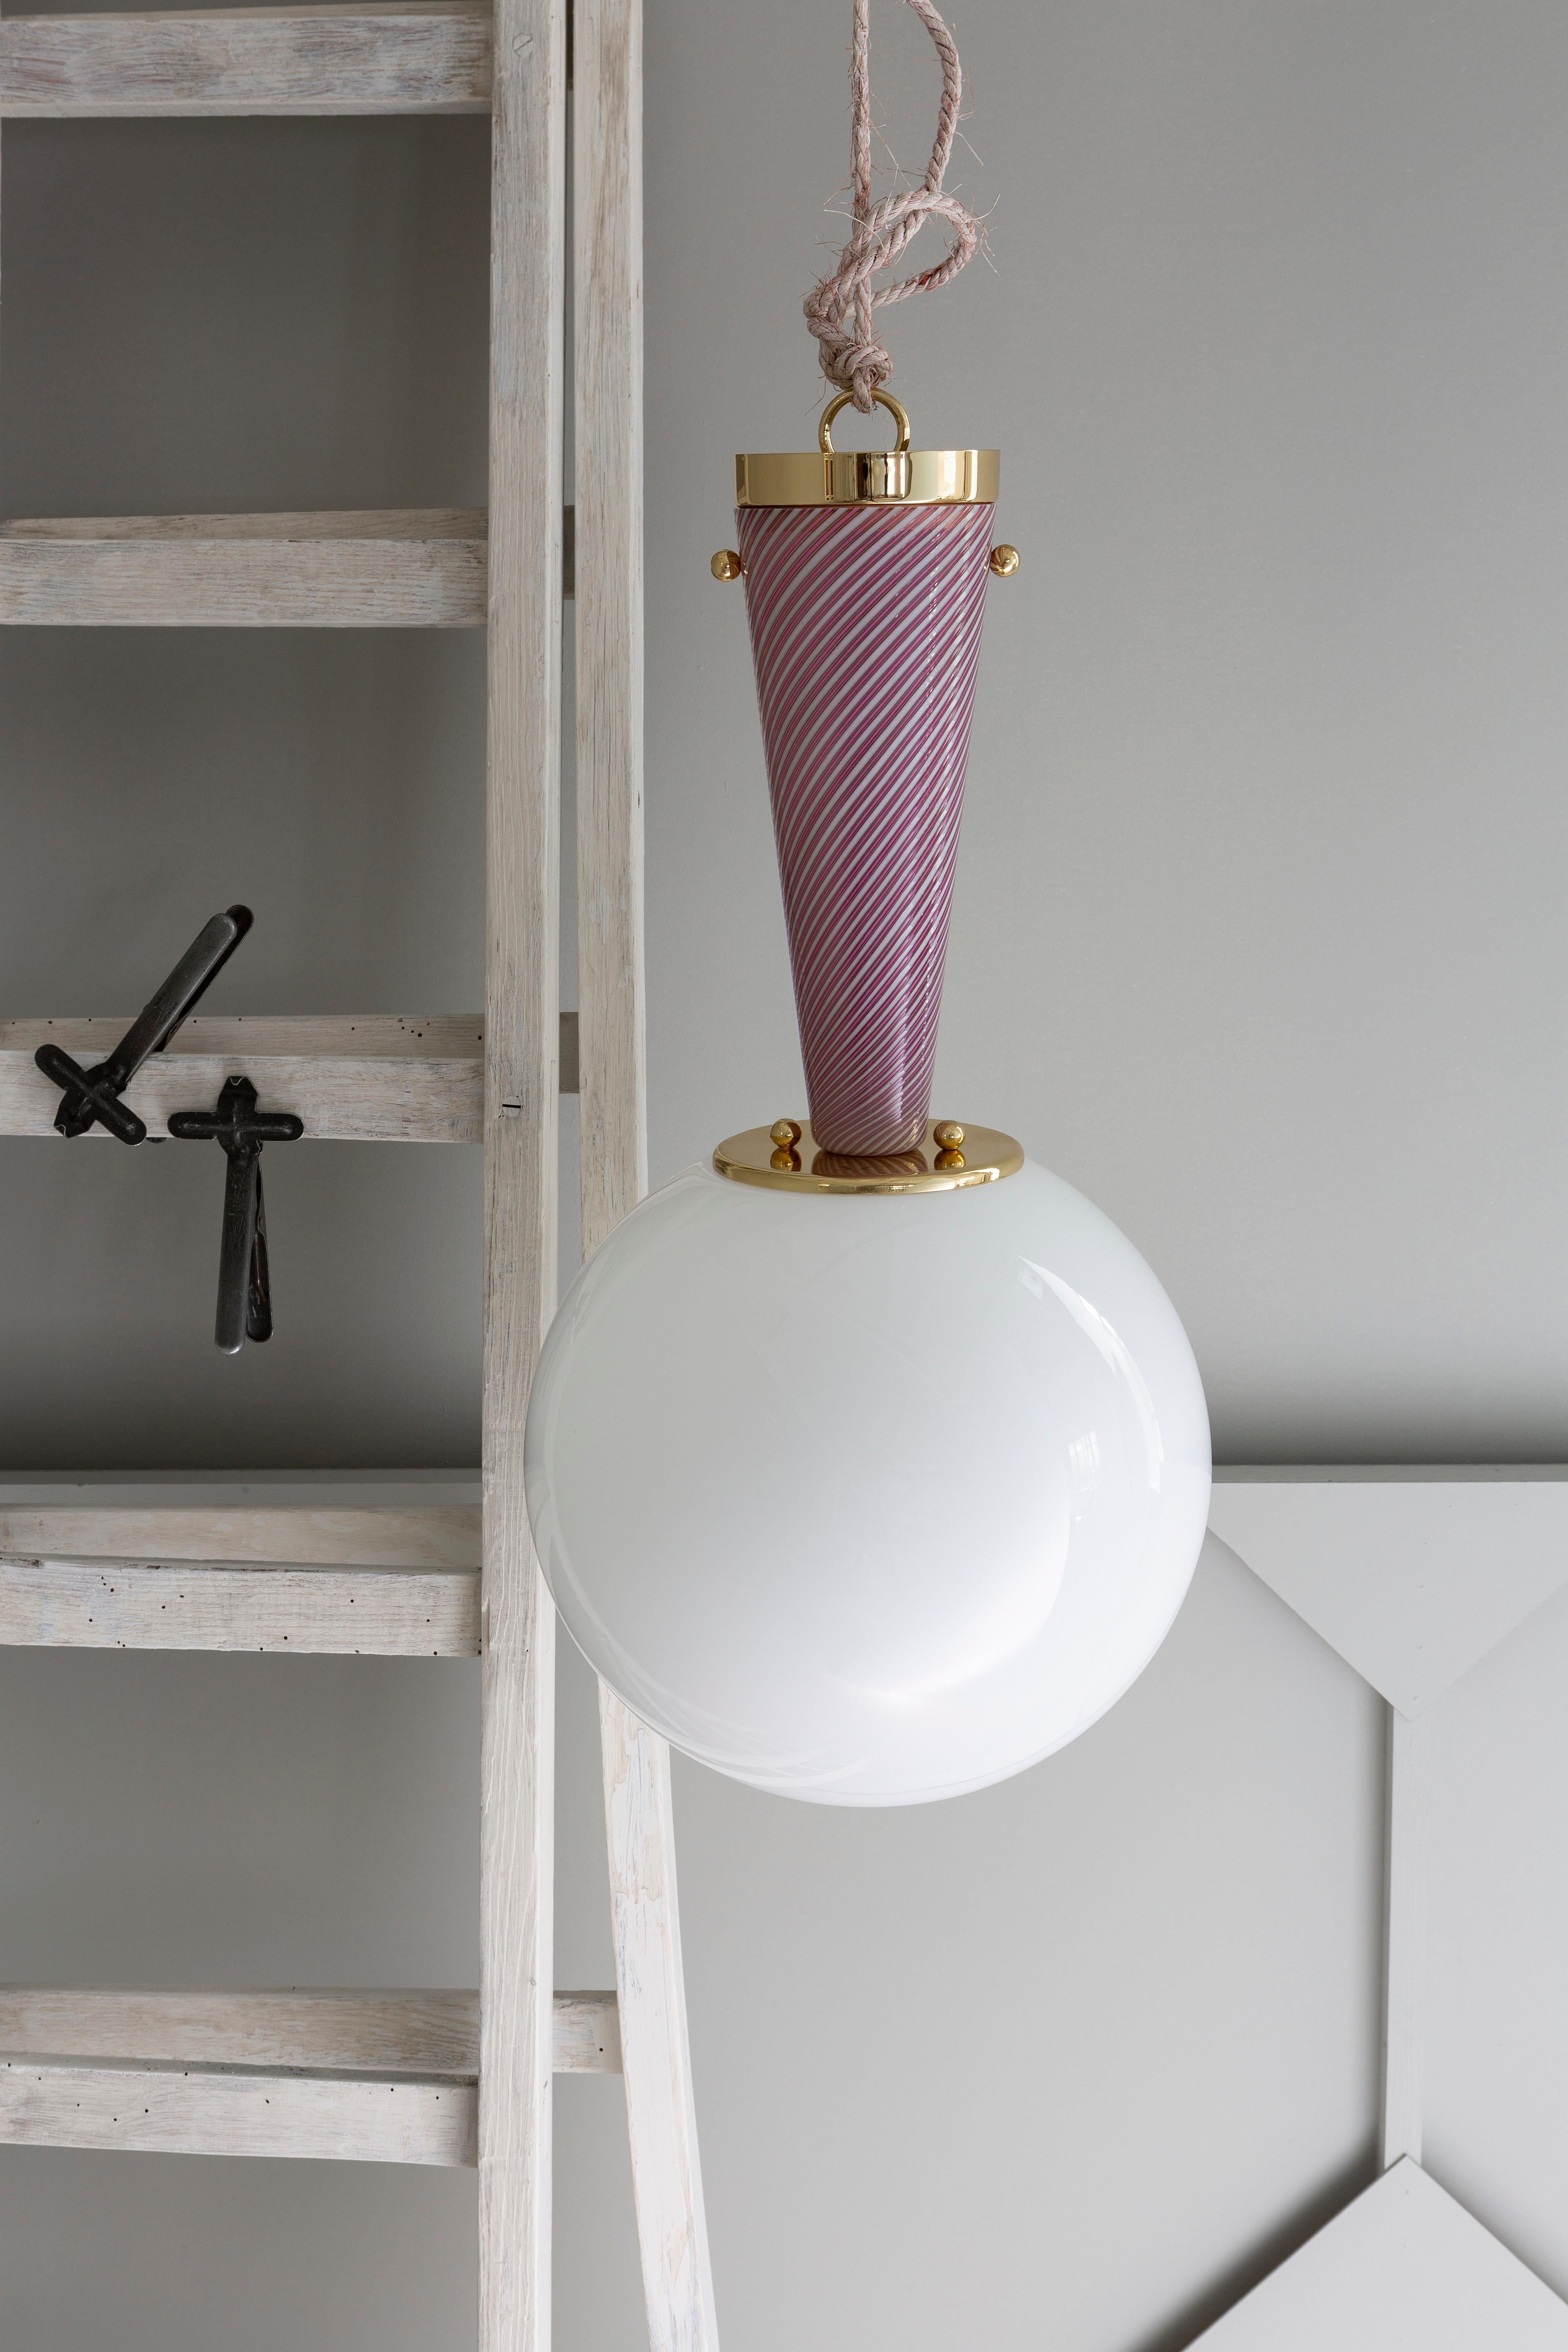 Set of 2 upside down pendant lamp 30 by Magic Circus Editions
Dimensions: Ø 30 x W 30 x H 57.9 cm
Materials: Brass, mouth blown glass
Available finishes: Lacquered polished brass / nickel
Available colours: Blu Senza Tempo, Verde Immaginario,